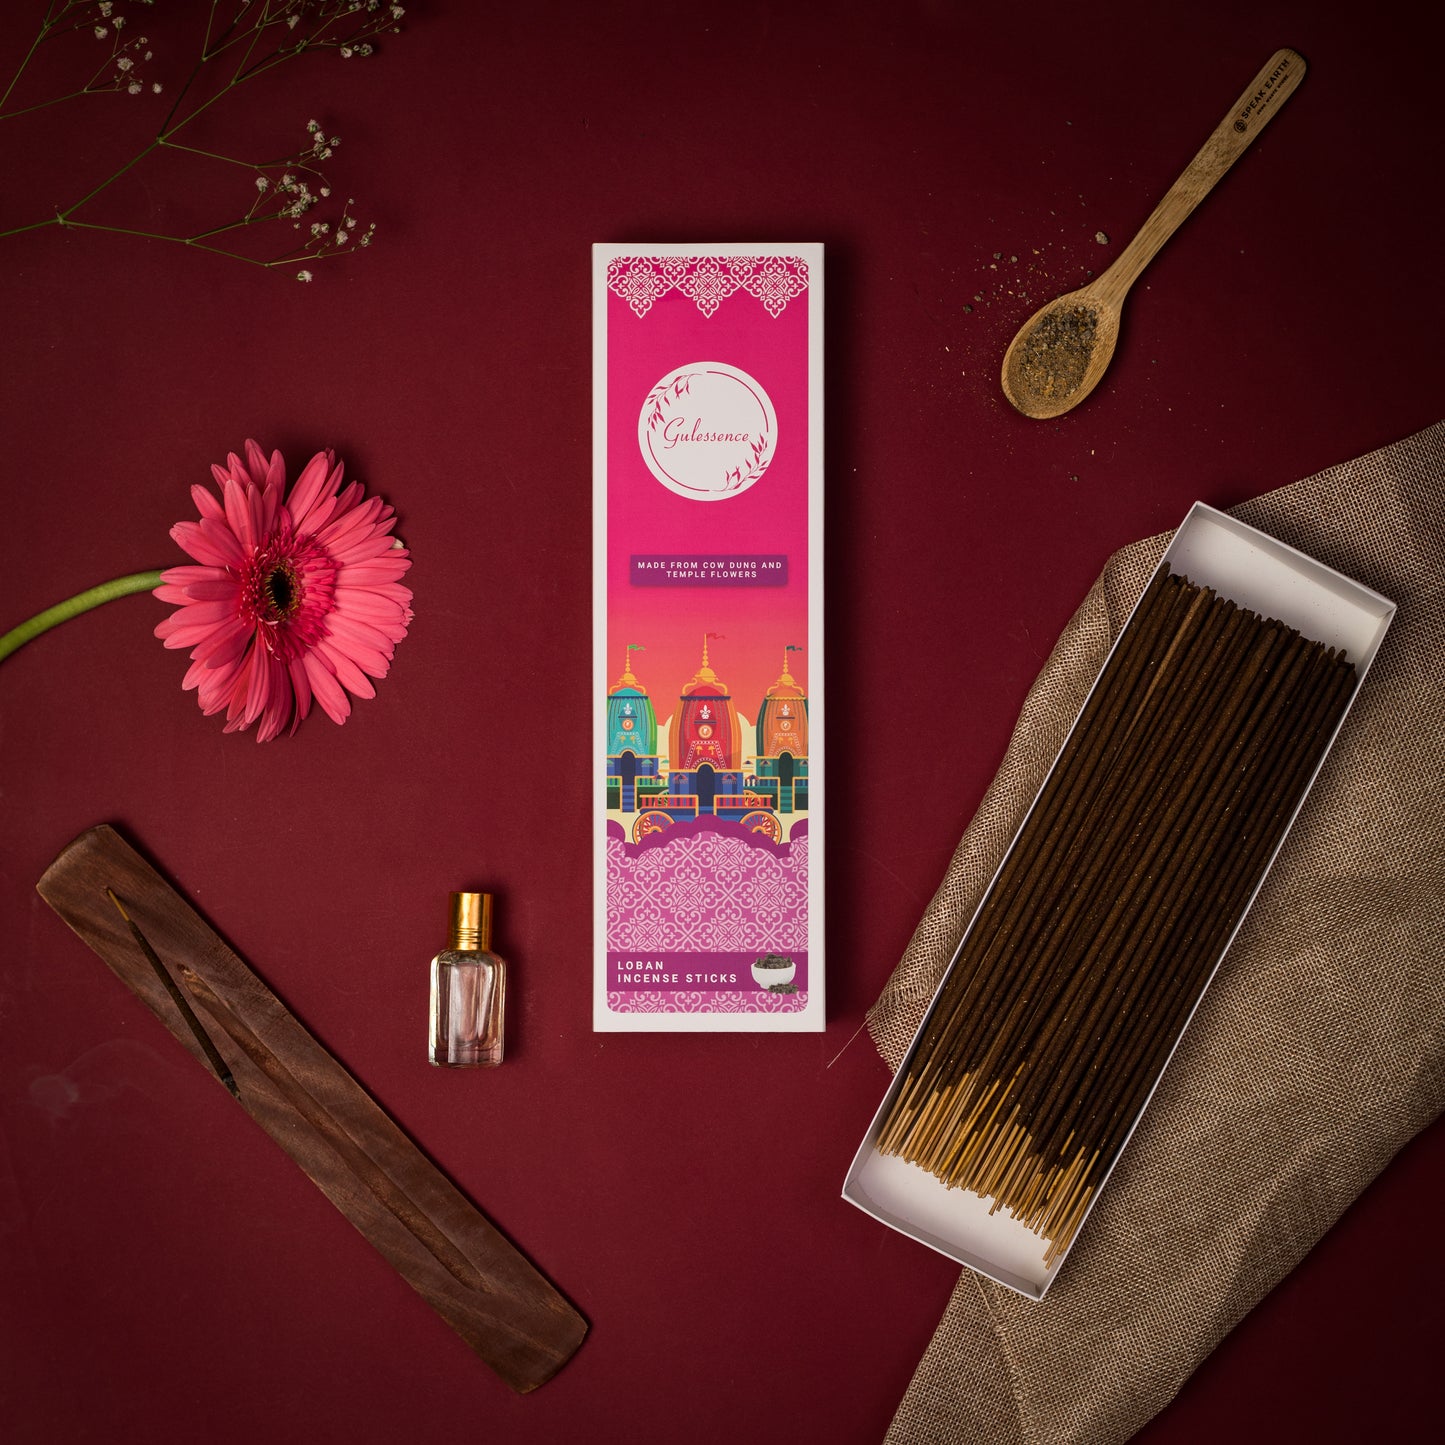 Loban & Sandalwood Incense sticks Petrichor - Made from Cowdung & Temple Flowers | Combo Boxes | Gulessence - Gulessence